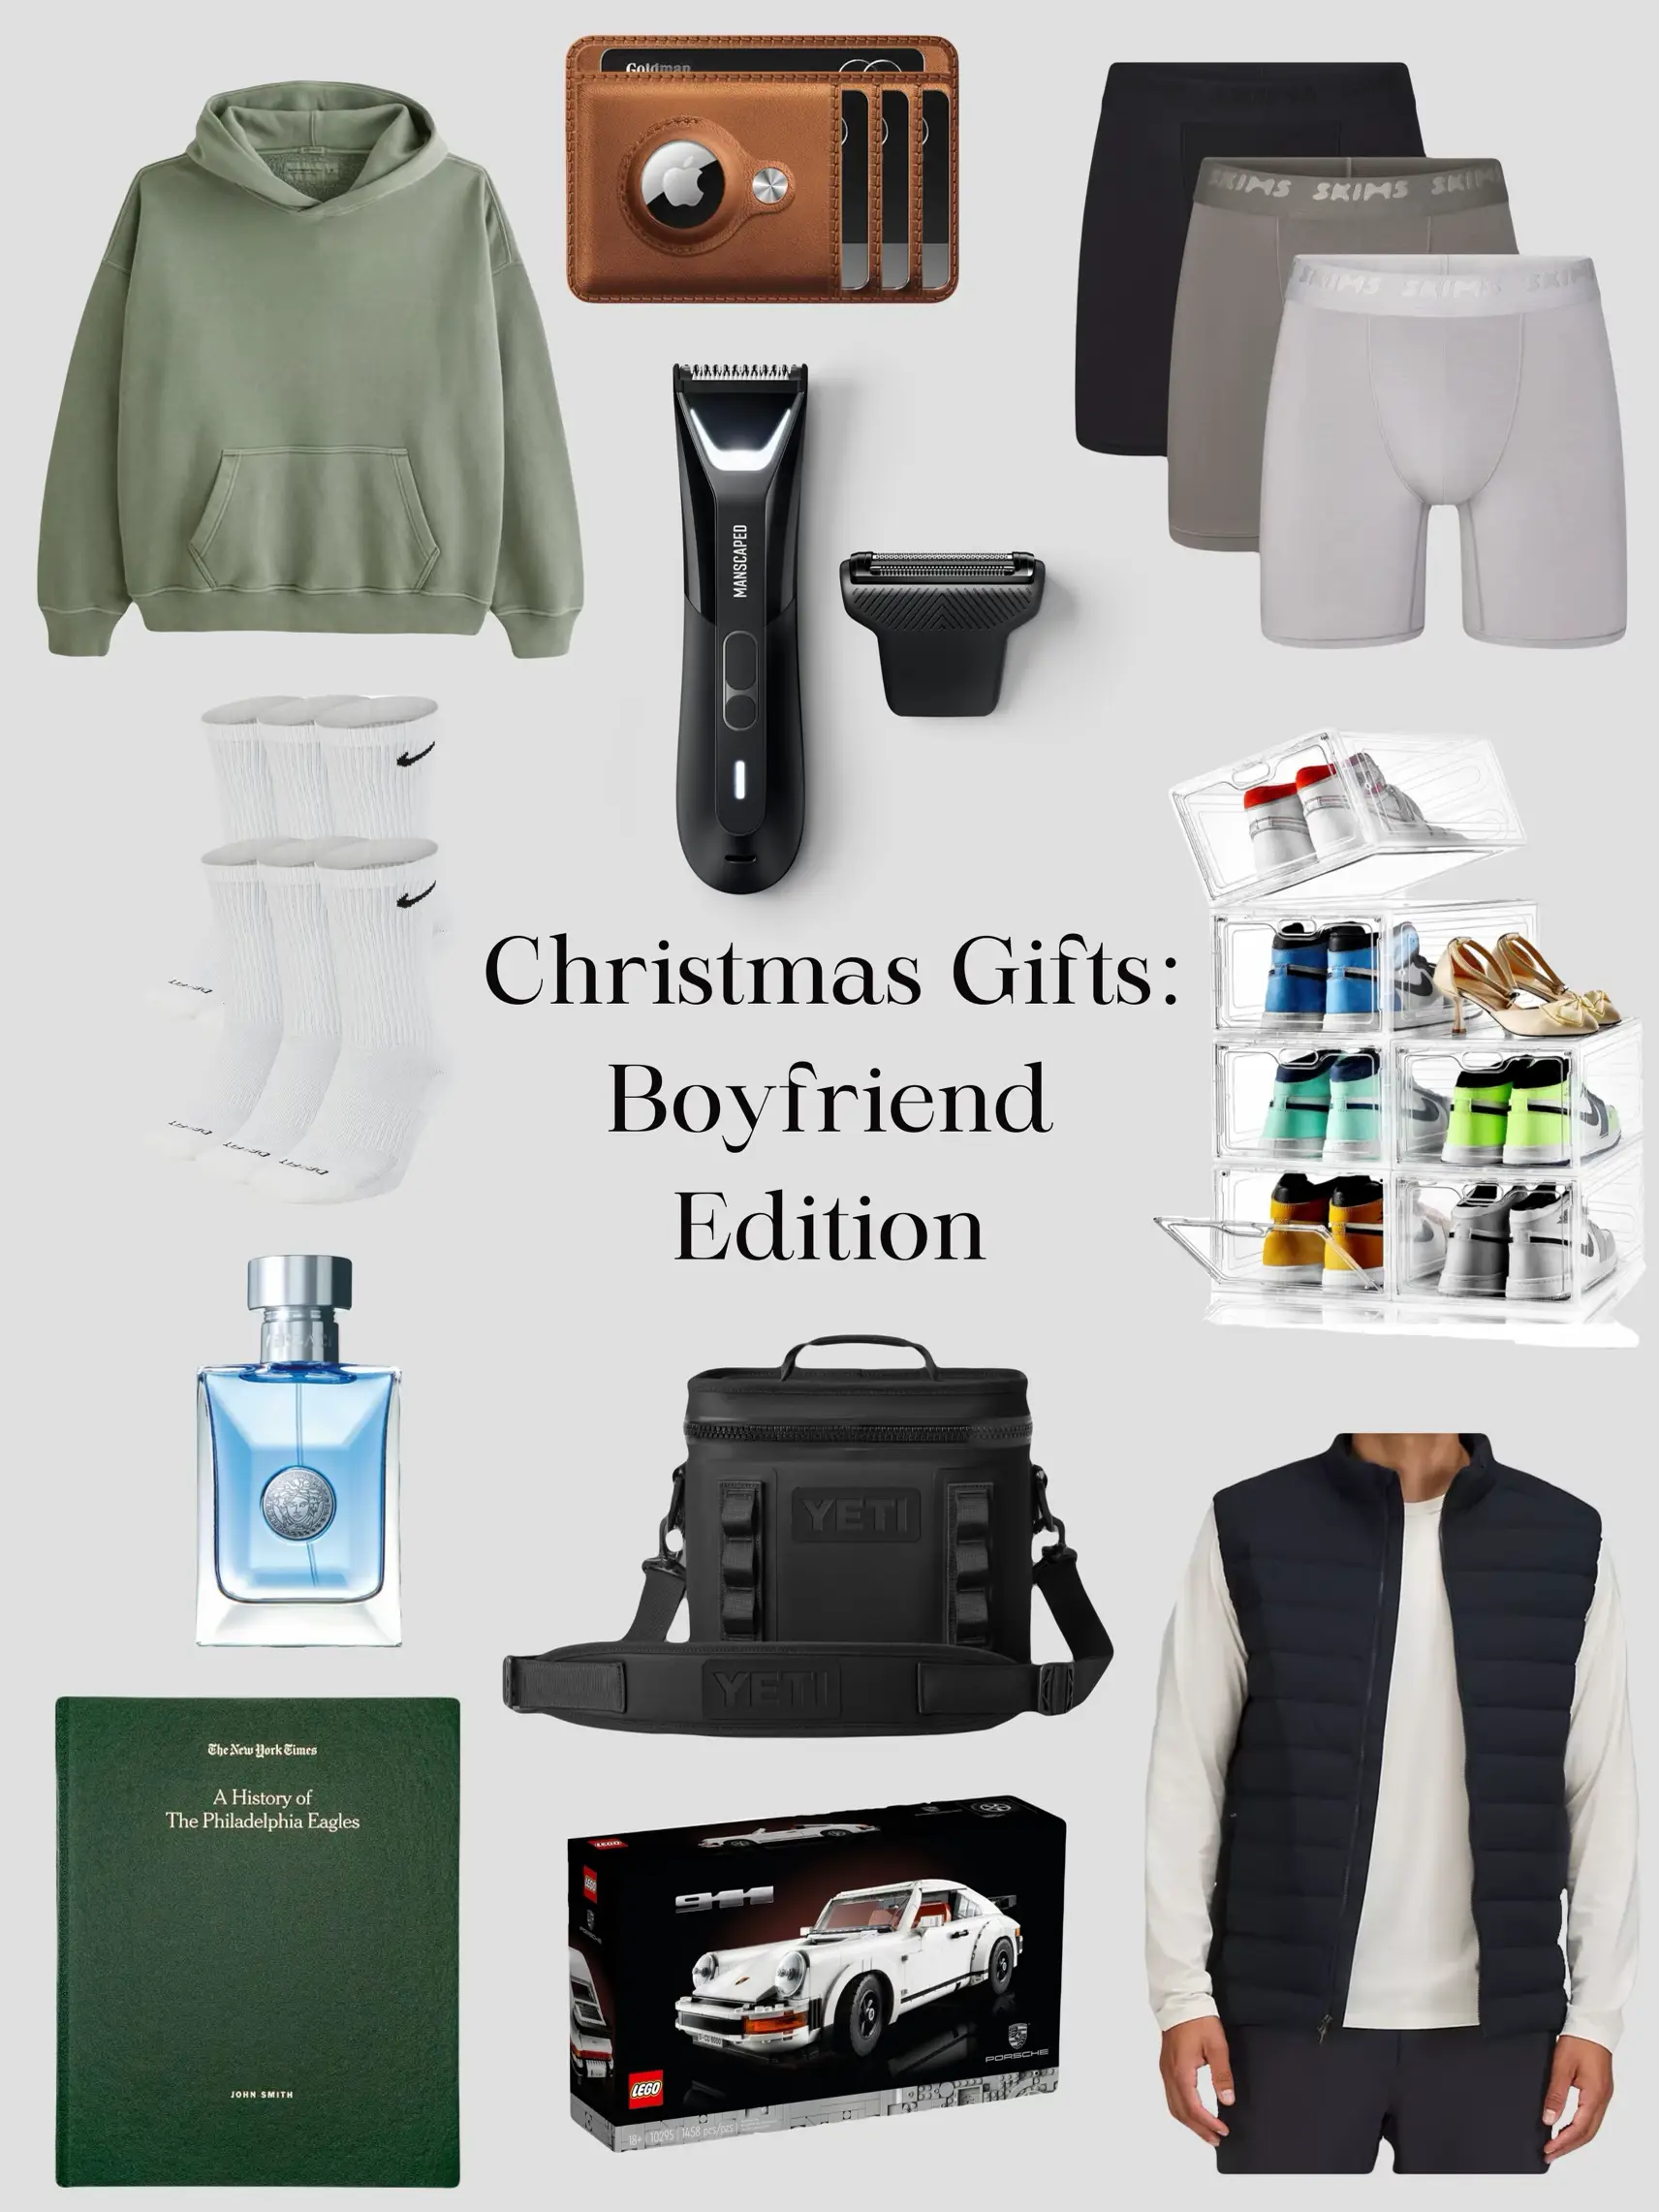 gifts for your boyfriend (actually good) pt 2!, Gallery posted by Avery